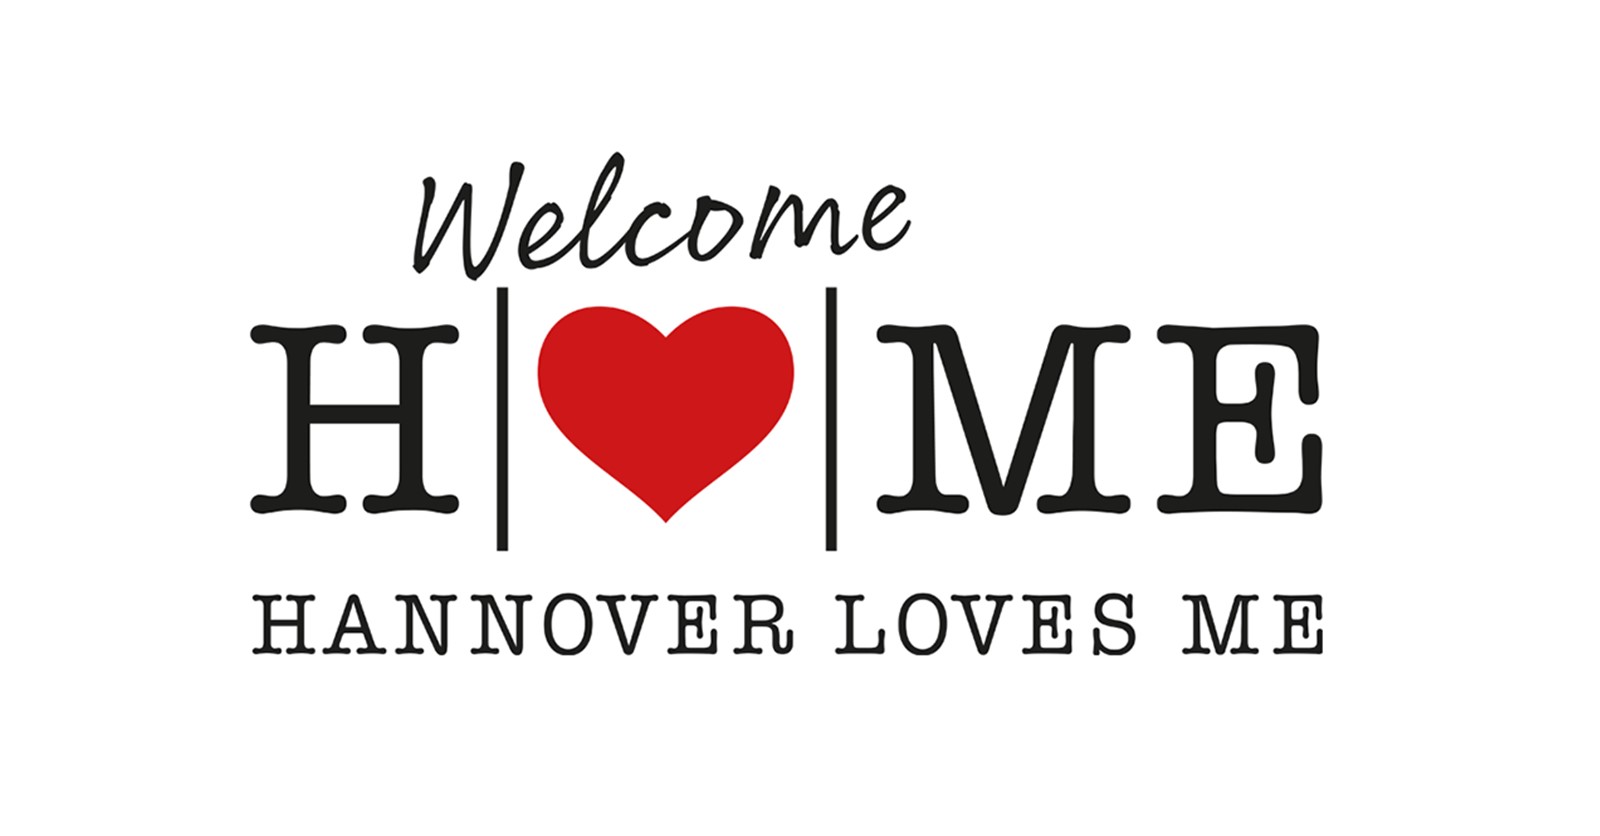 Style Hannover Welcome Home FB - Projekt-Plattform für Hannover - Welcome HOME!